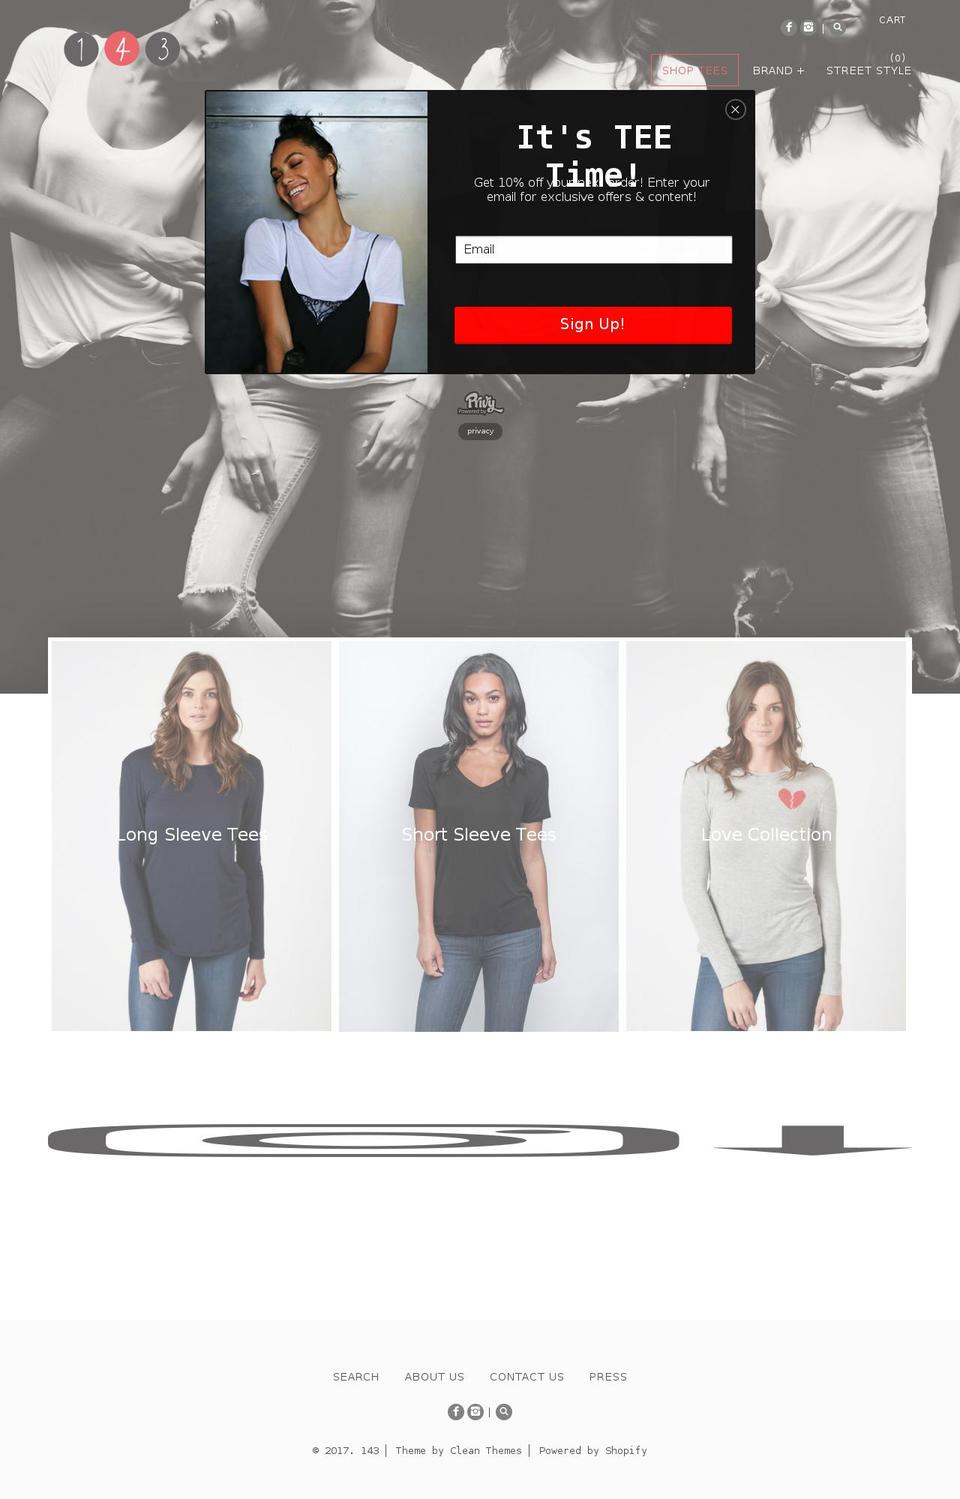 Alchemy Shopify theme site example 143tees.com